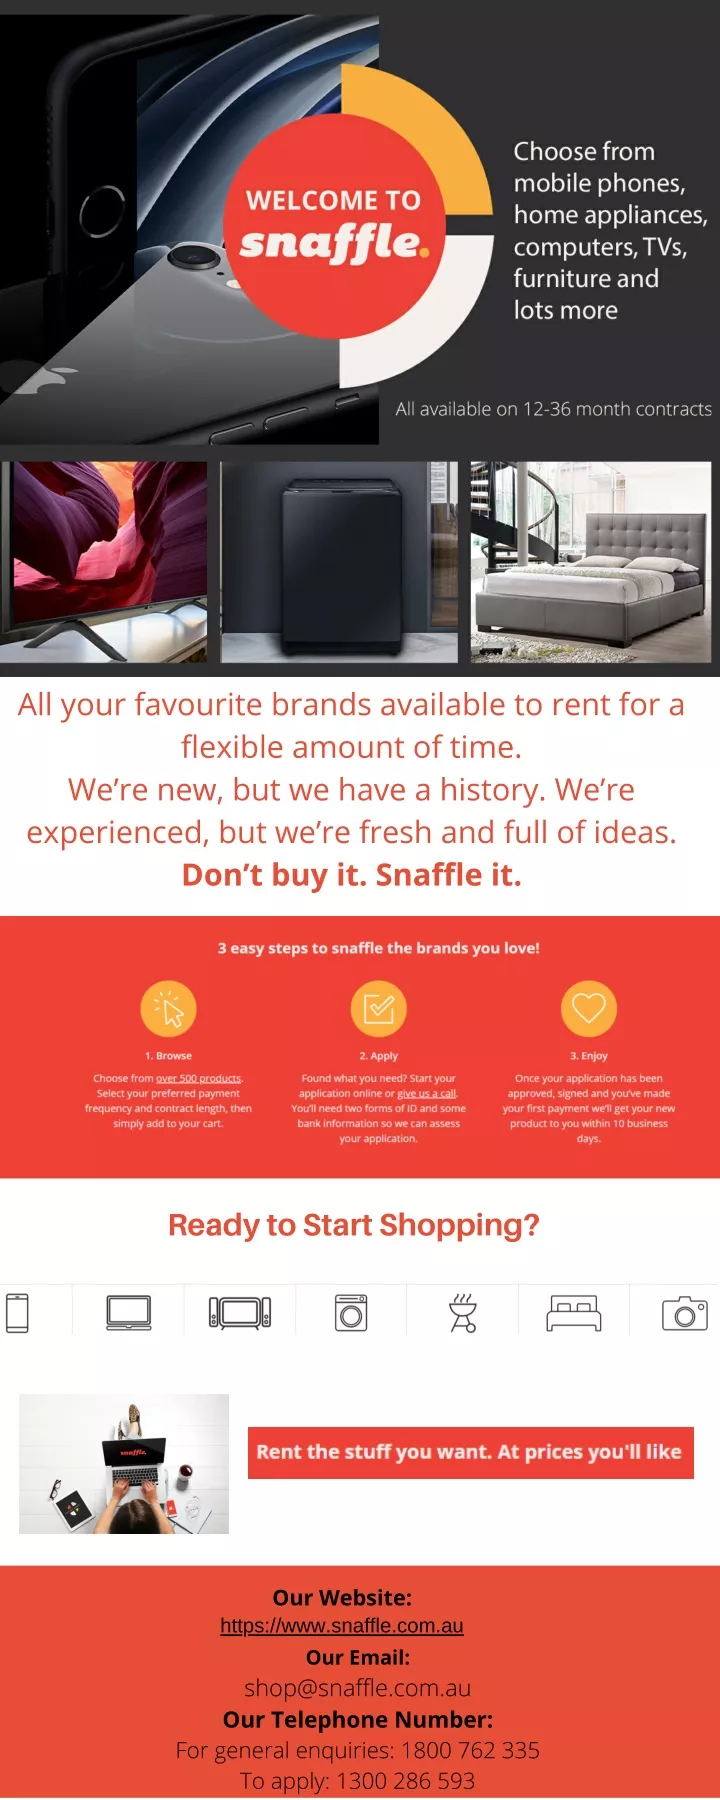 all your favourite brands available to rent